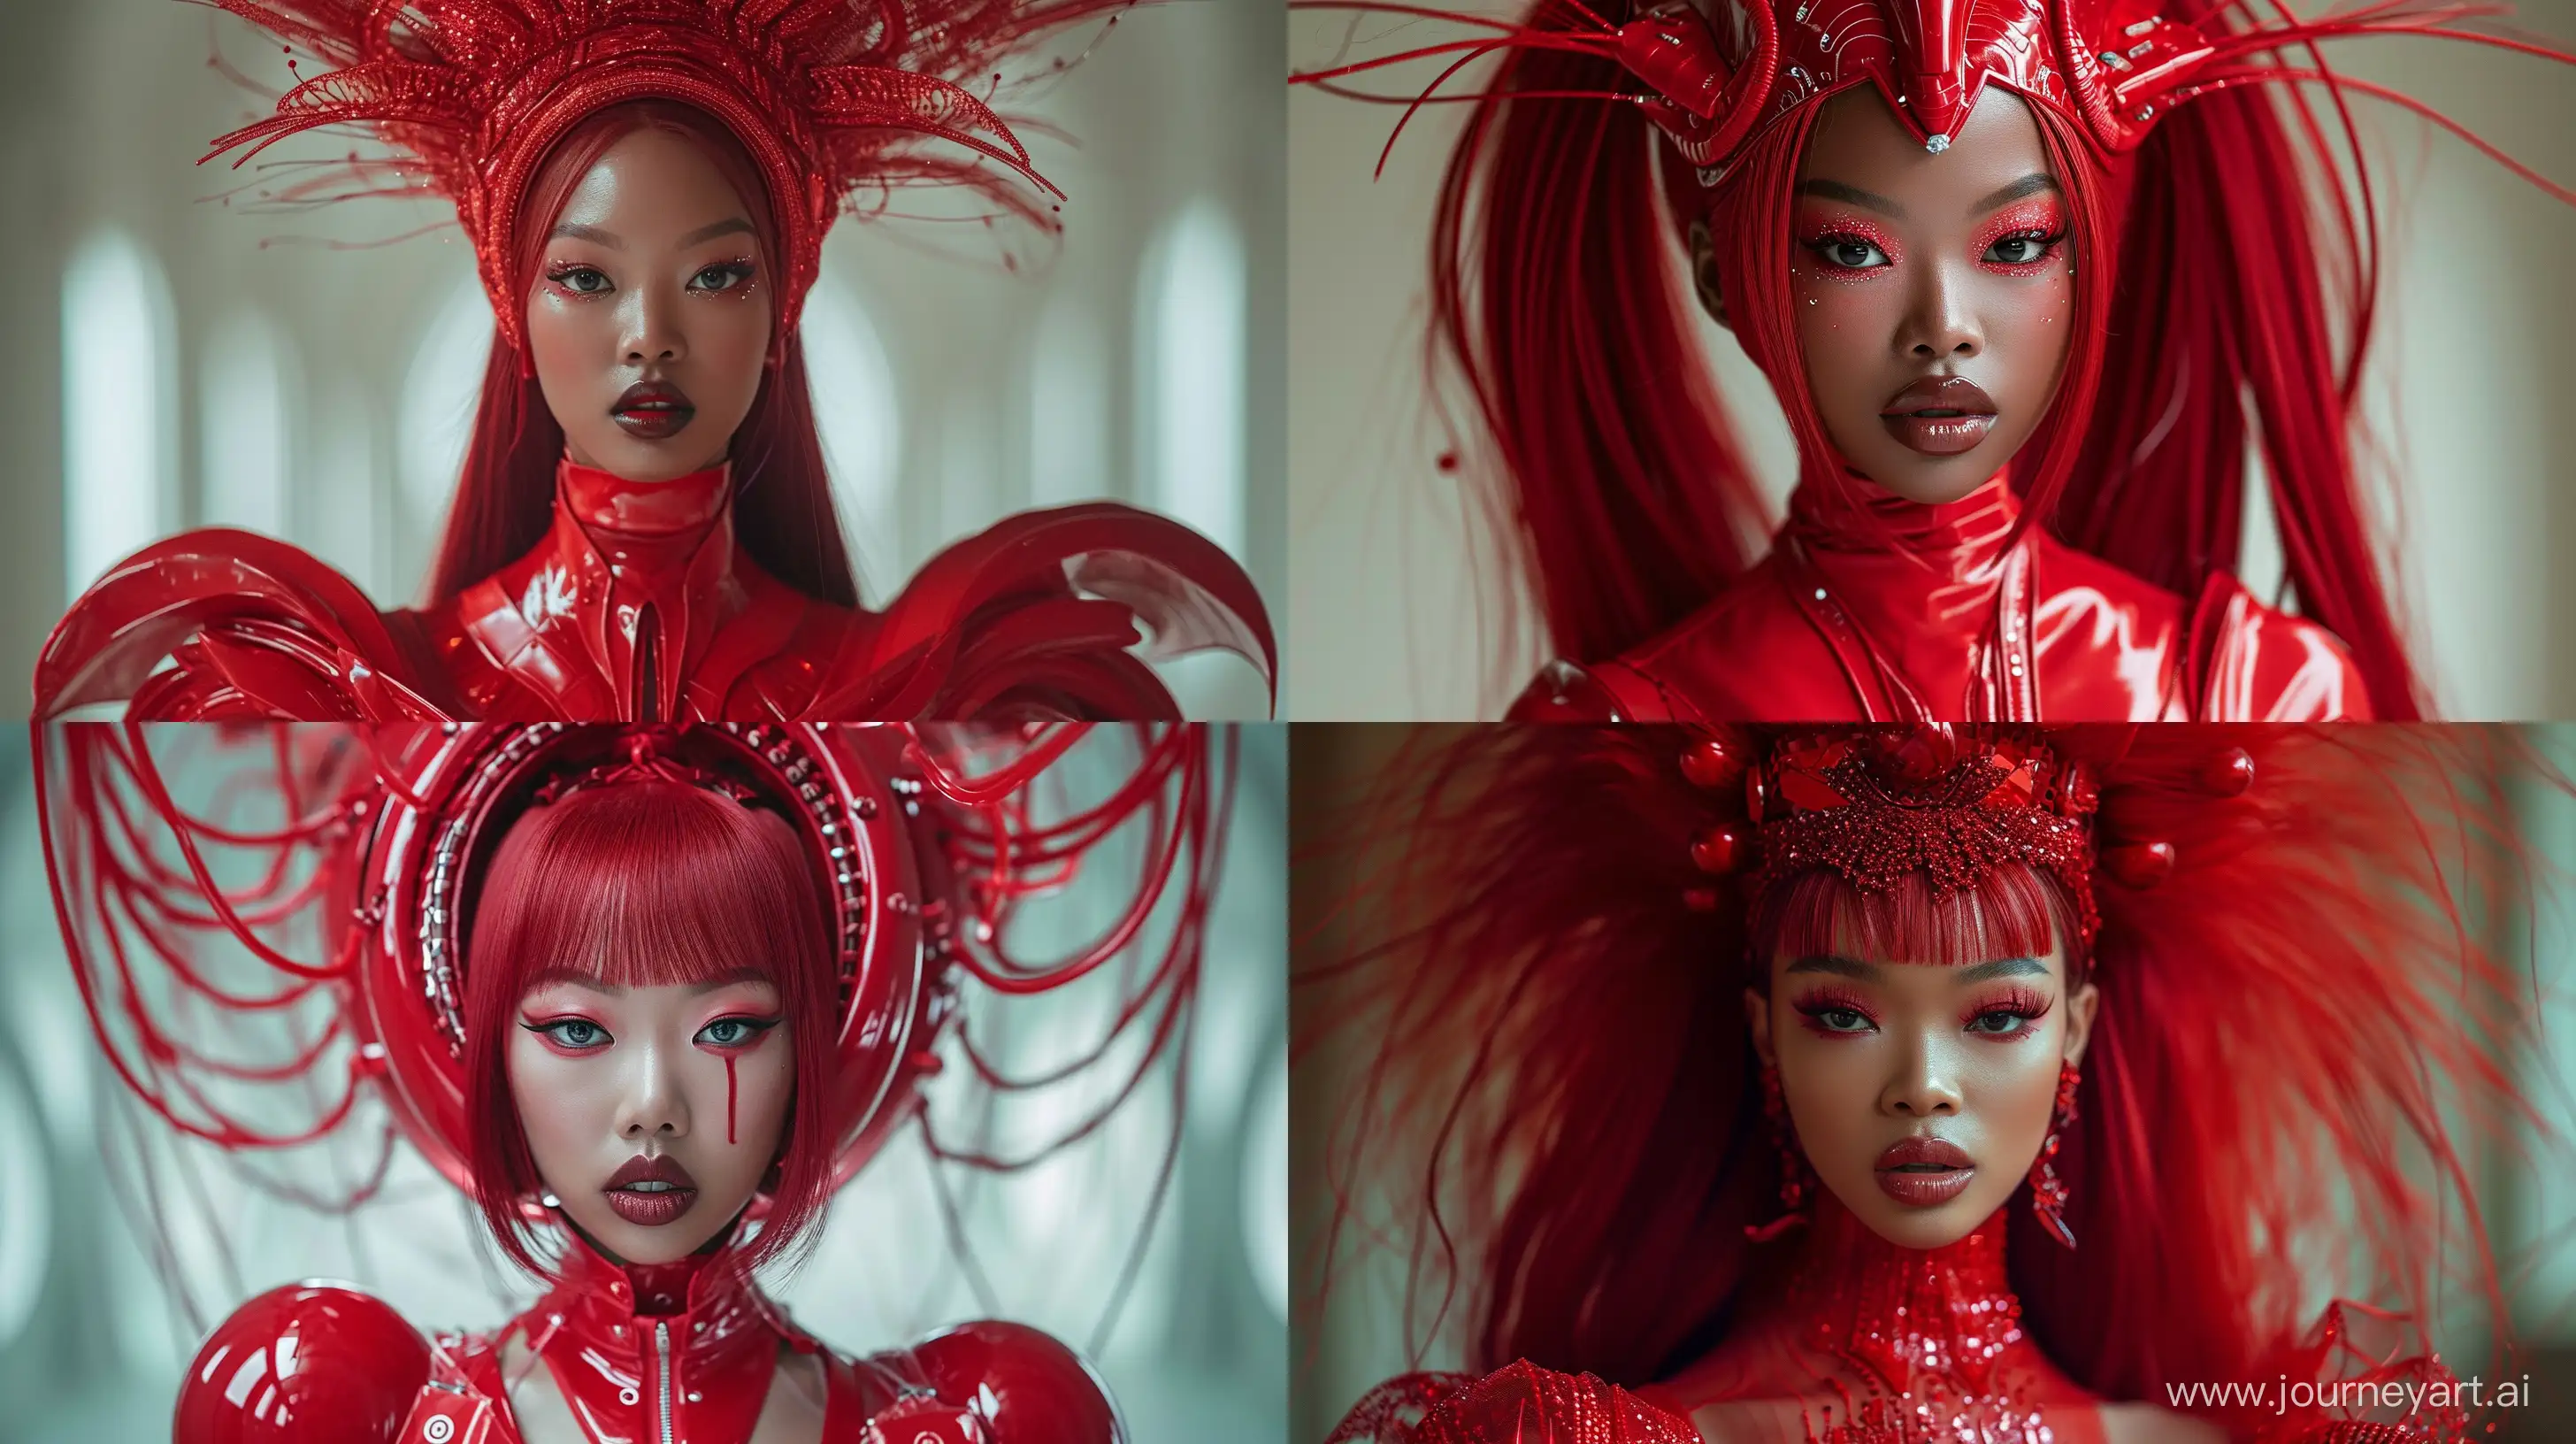 Edgy-Black-Kpop-Idol-in-Red-Futuristic-Outfit-with-Headpiece